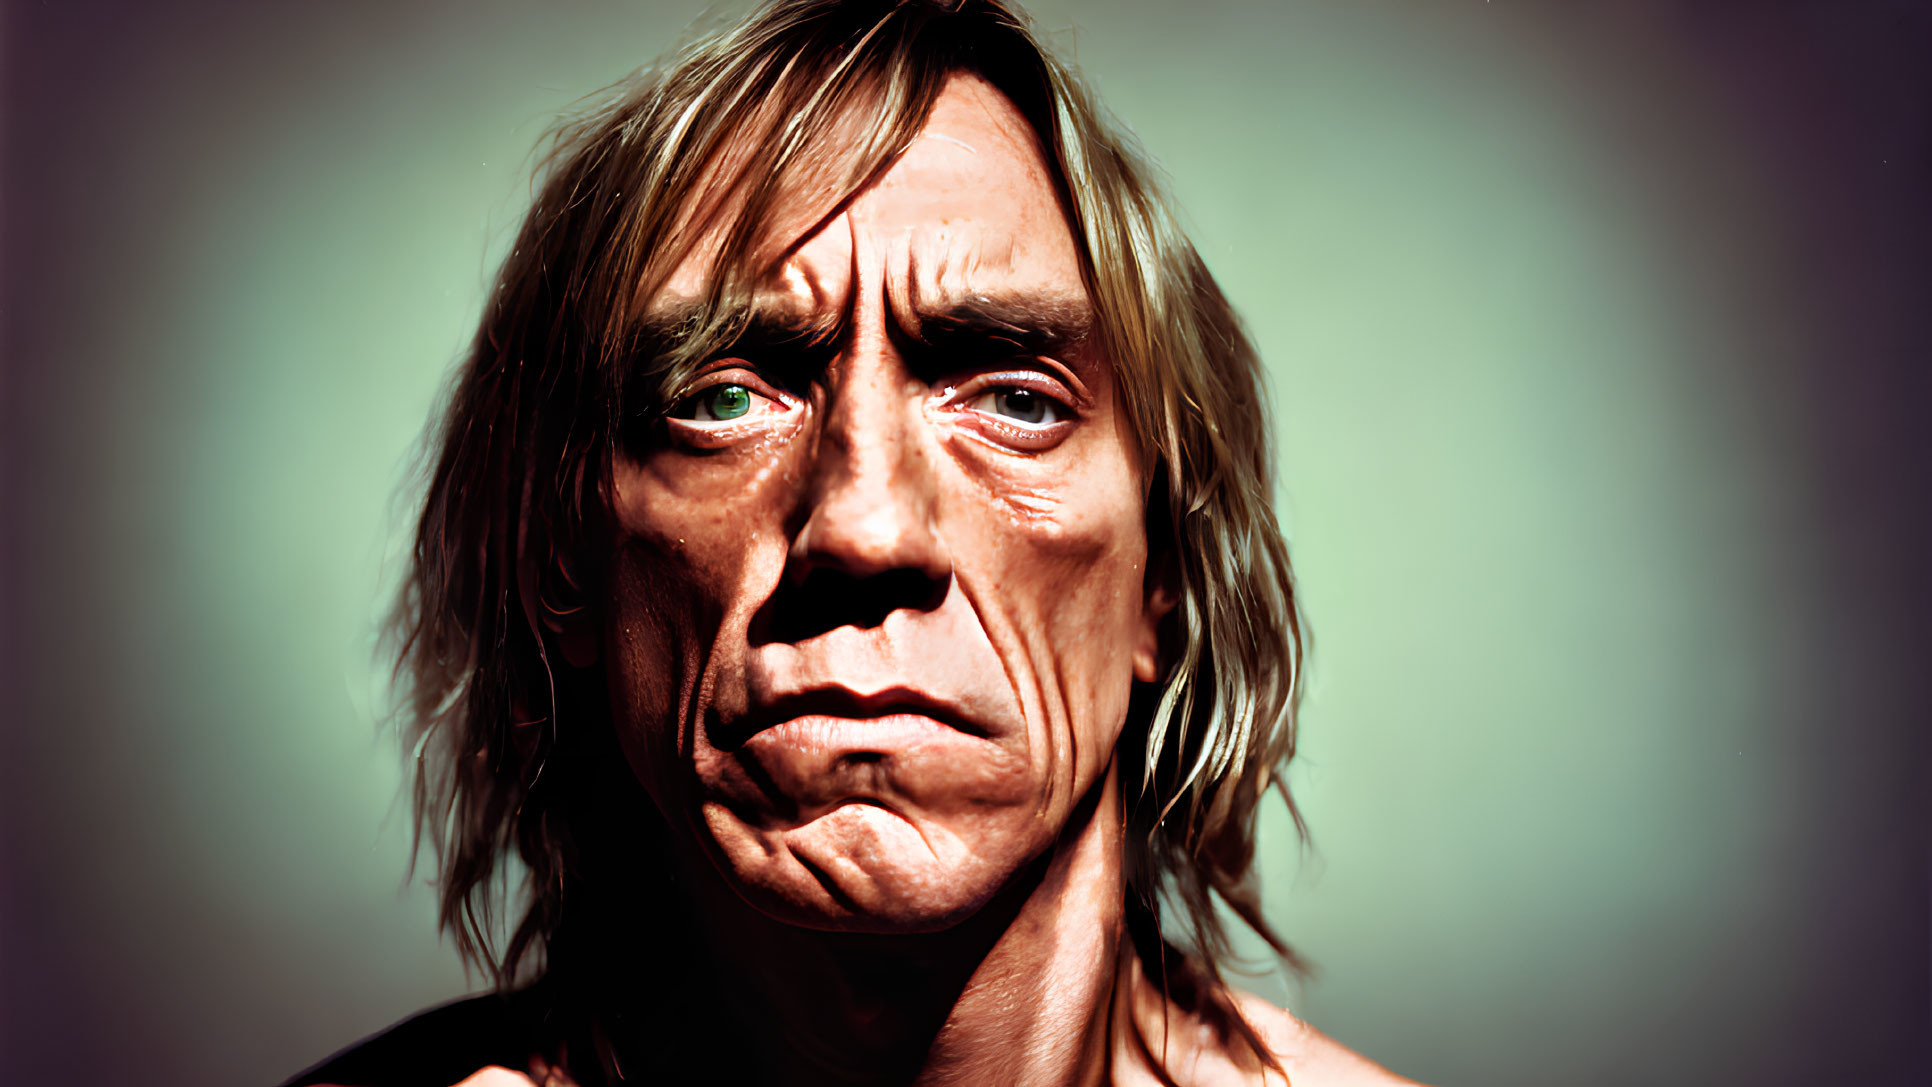 Digital artwork: Gaunt male face with long hair and sunken eyes